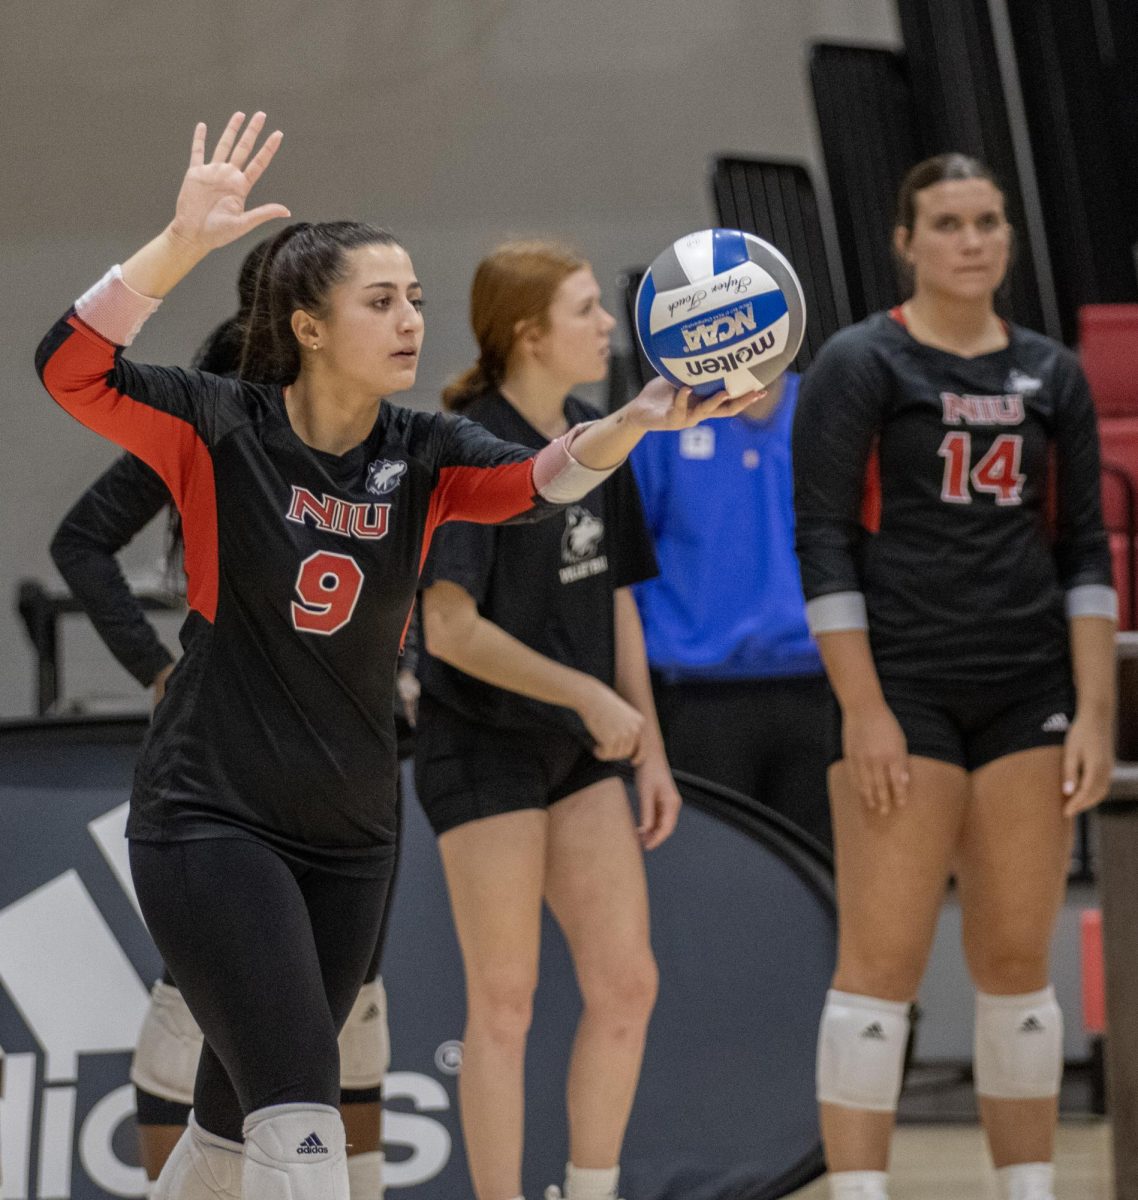 Junior+defensive+specialist%2Flibero+Jada+Cerniglia+prepares+to+serve+in+an+NIU+volleyball+home+game+against+the+University+of+Akron+on+Oct.+27%2C+2023.+The+MAC+announced+a+new+schedule+format+for+conference+games+on+March+27.+%28Tim+Dodge+%7C+Northern+Star%29